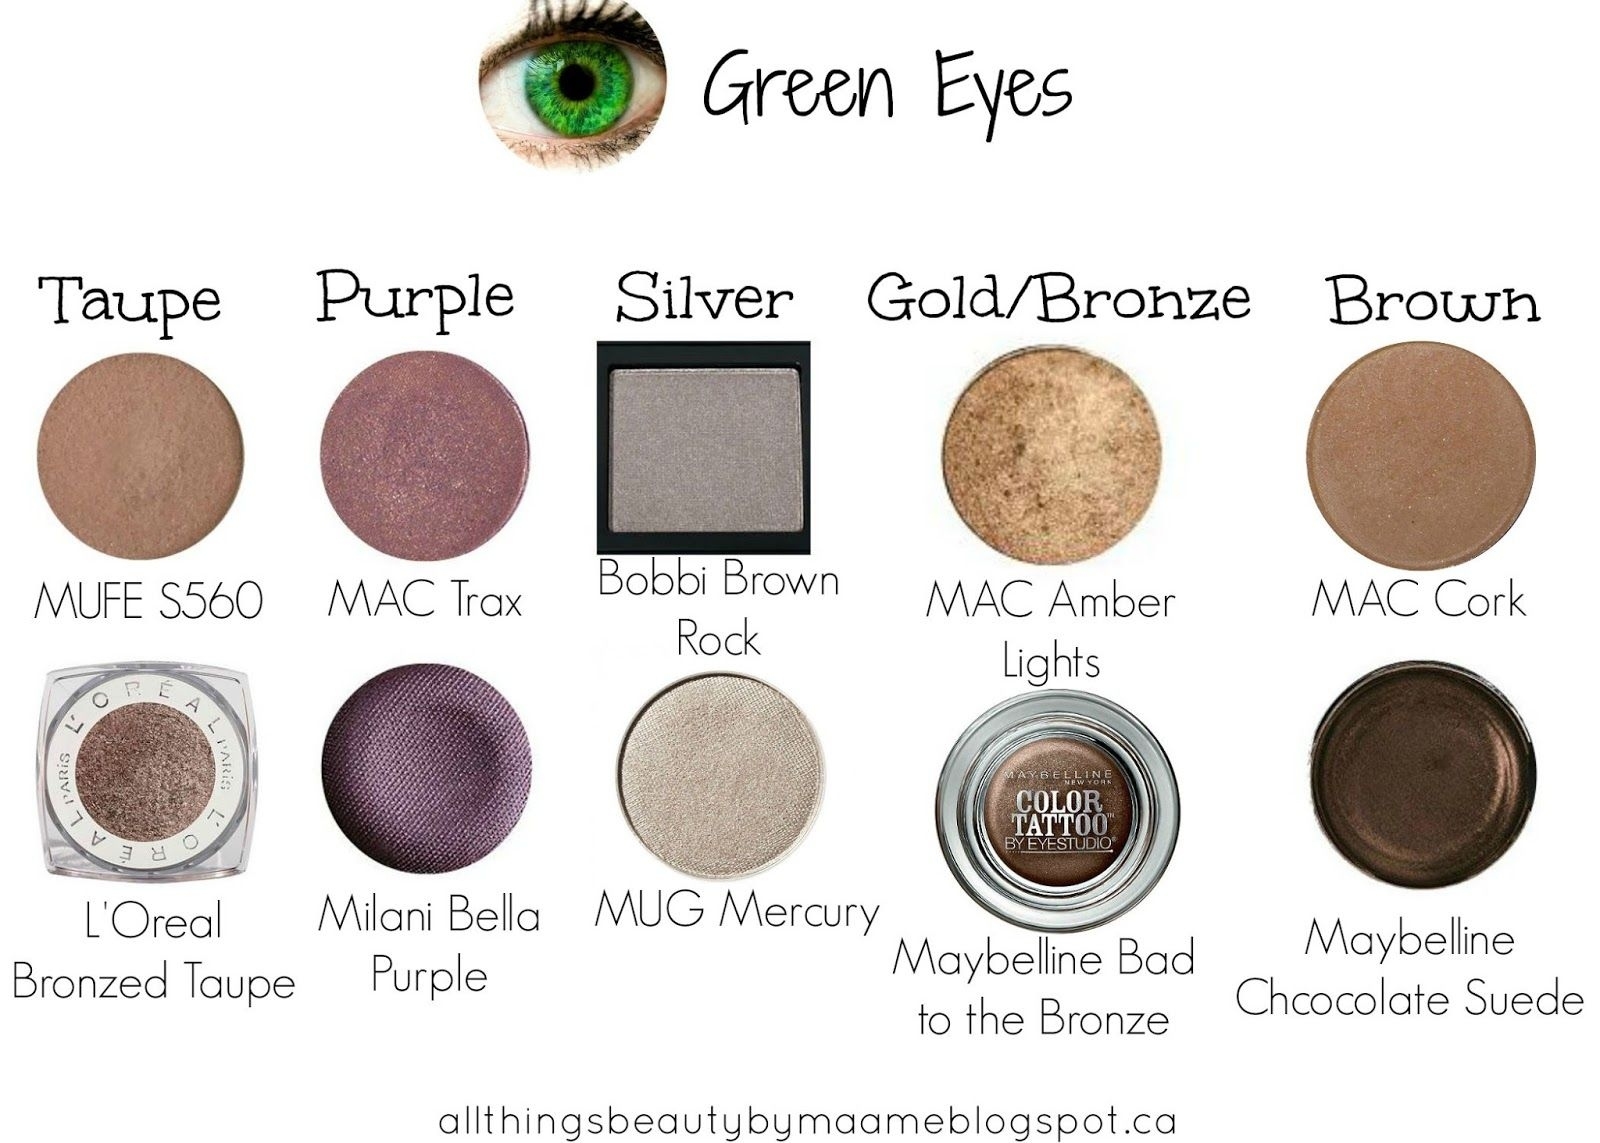 Beauty Guide : Best Eyeshadows For Your Eye Colour In 2019 throughout Mac Brown Eyeshadows For Green Eyes